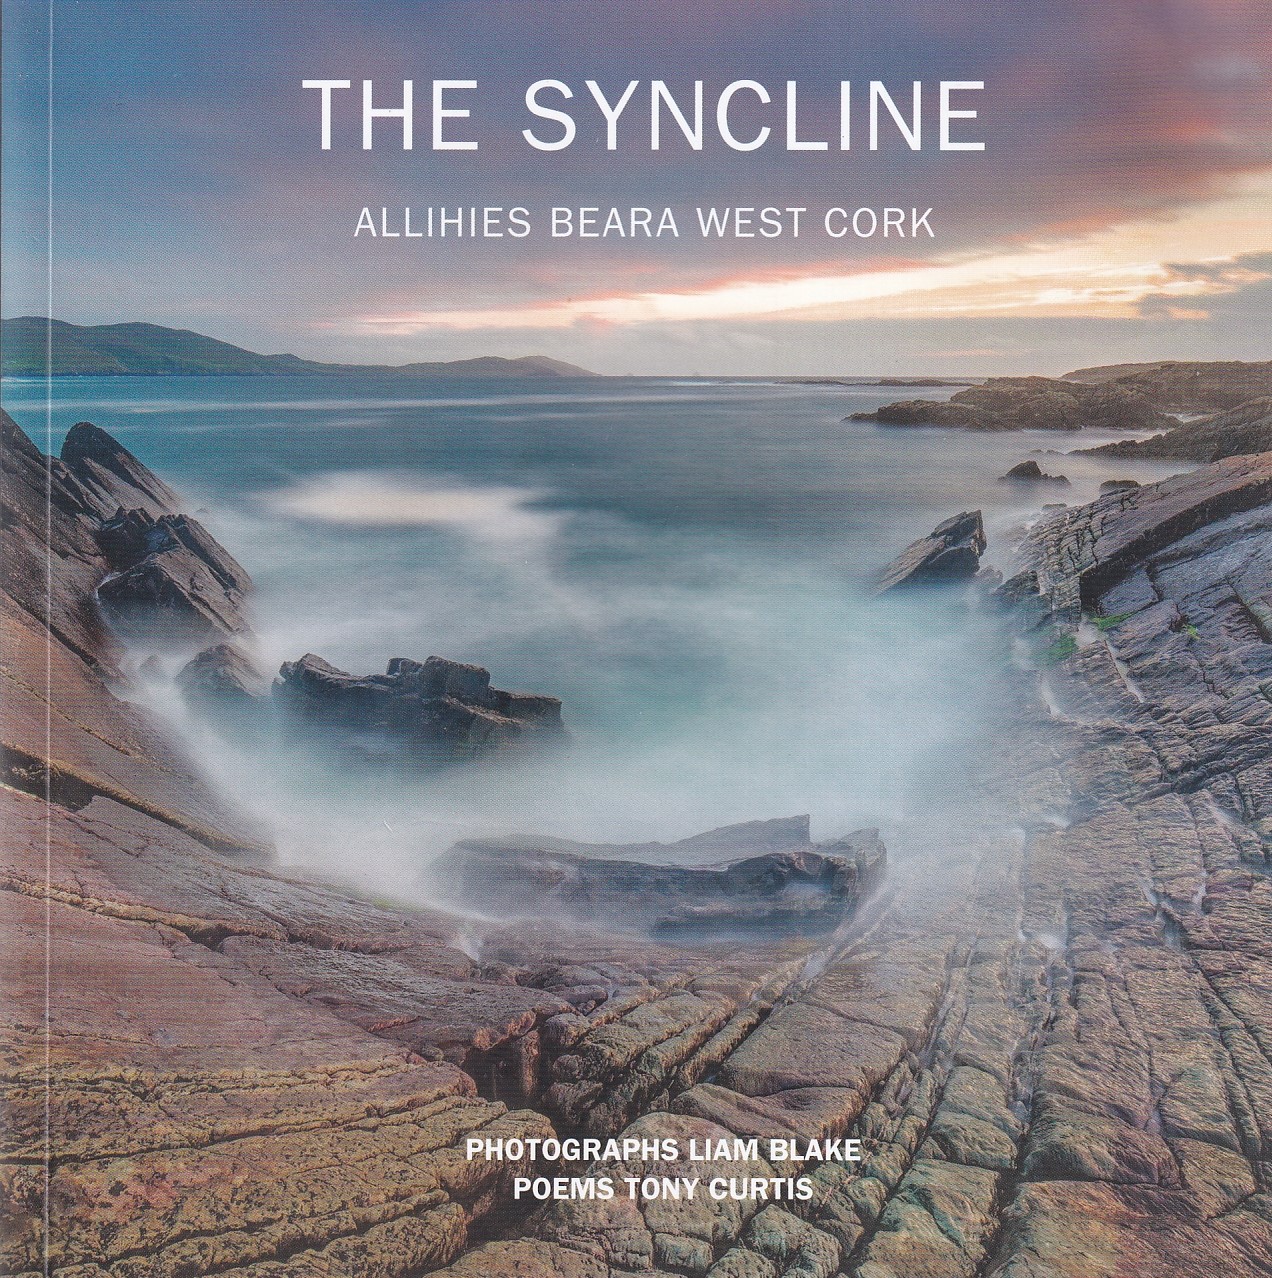 The Syncline: Allihies Beara West Cork [SIGNED] | Liam Blake & Tony Curtis | Charlie Byrne's